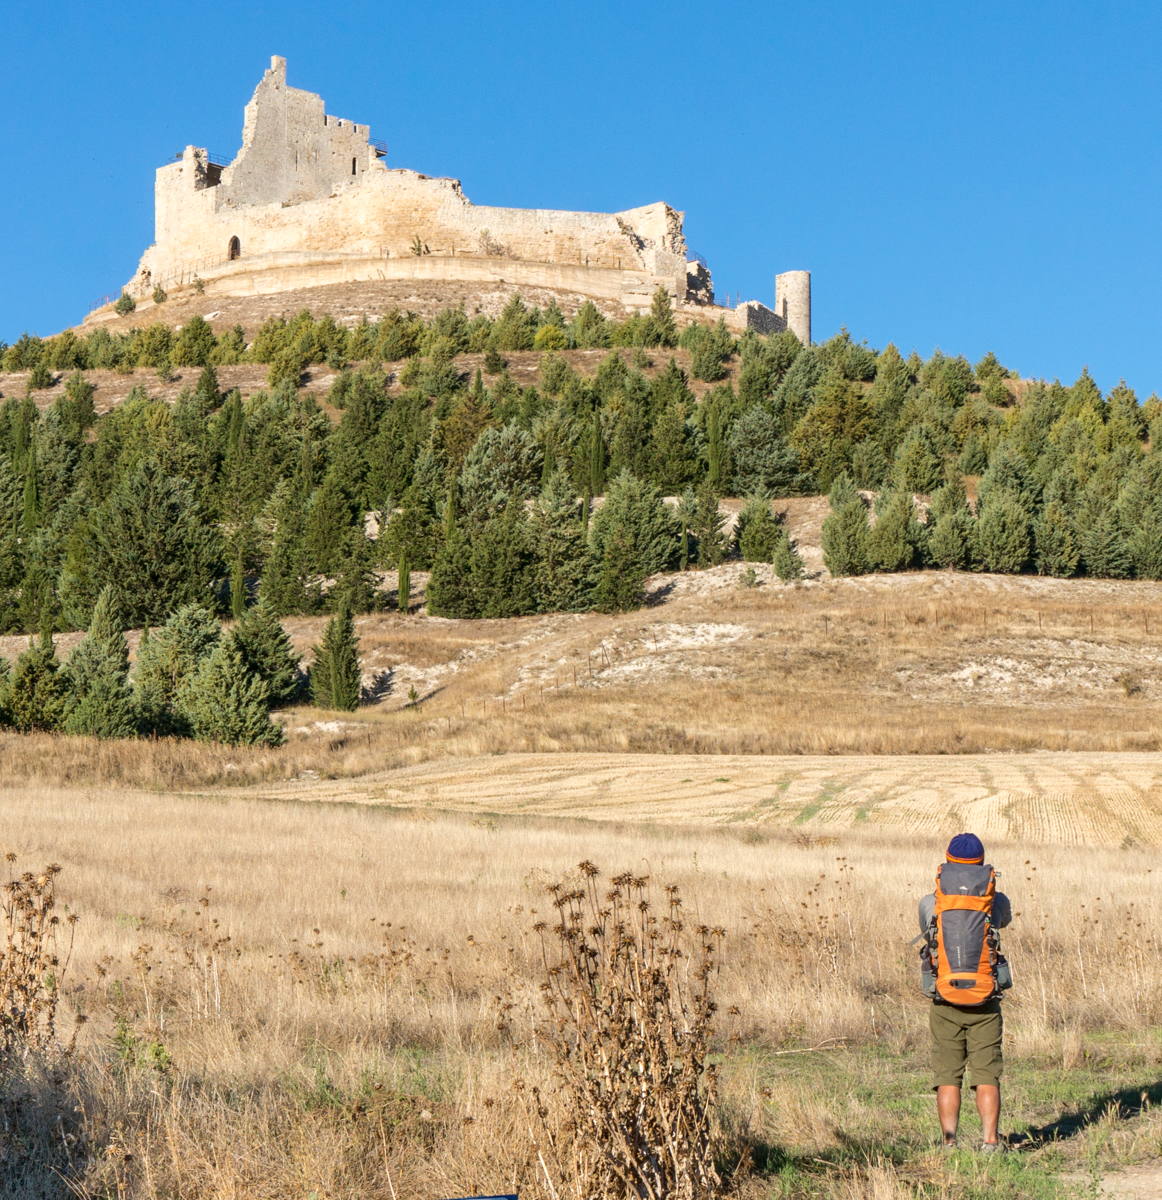 A Camino pilgrim contemplates ruins of the 9th century castle overlooking Castrojeriz, Spain | Photo by Mike Hudak